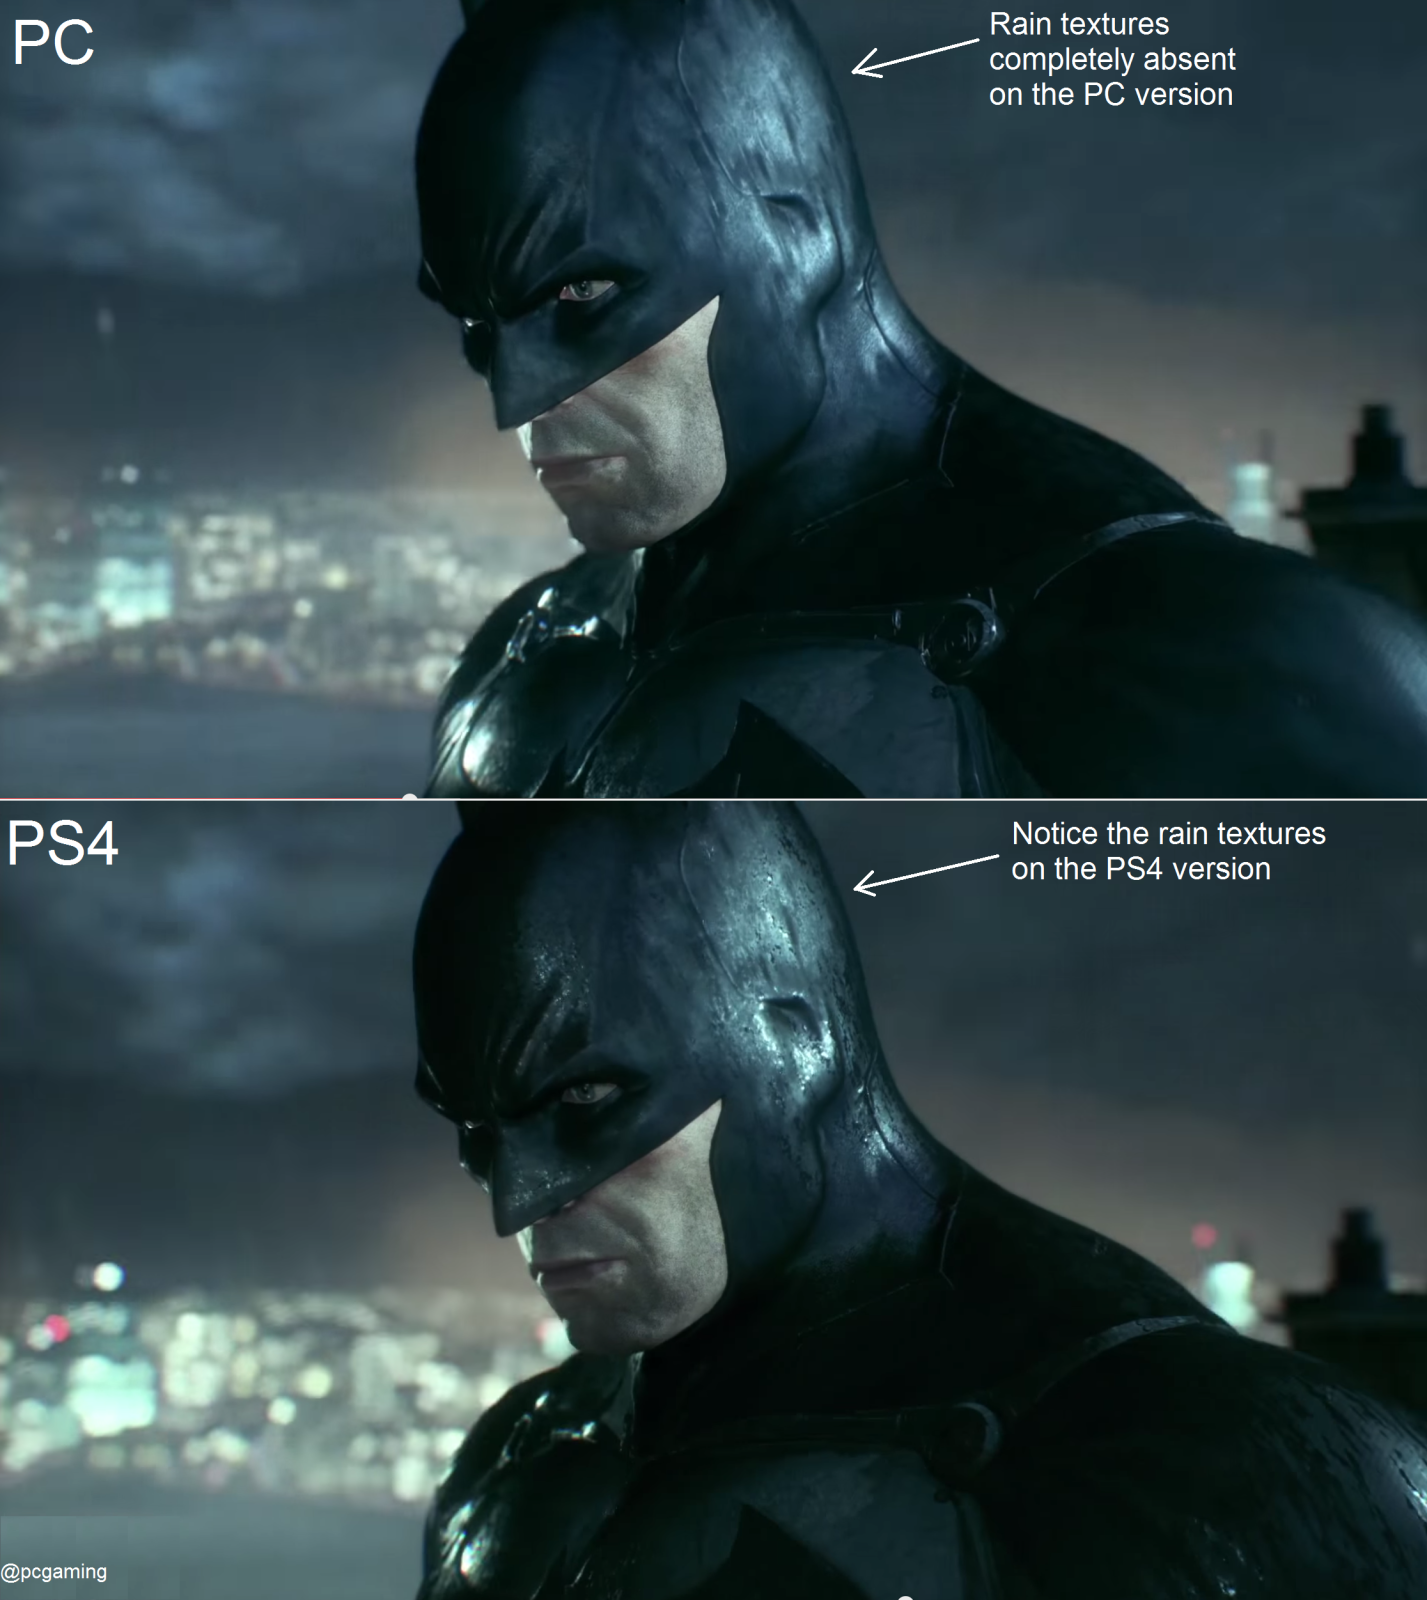 After 4 Months Of Work, Batman: Arkham Knight Returns To PC on October 28th  - Legit Reviews